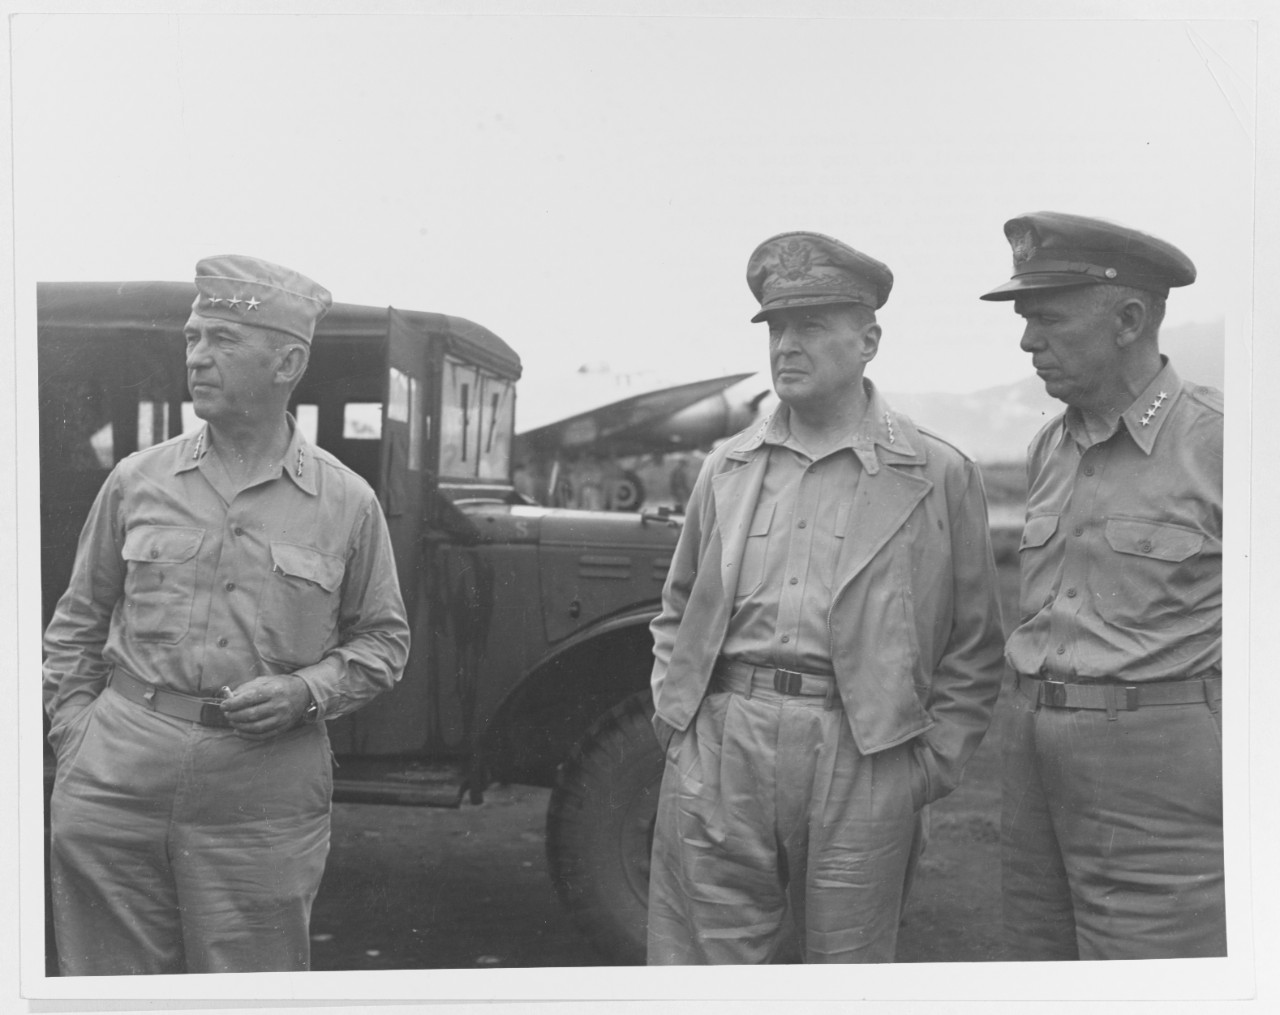 Photo #: SC 183951  Lieutenant General Walter Krueger Commanding General, U.S. Sixth Army (left) General Douglas MacArthur, Supreme Commander, Allied Forces, Southwest Pacific Area, and General George C. Marshall, Chief of Staff, U.S. Army (right)